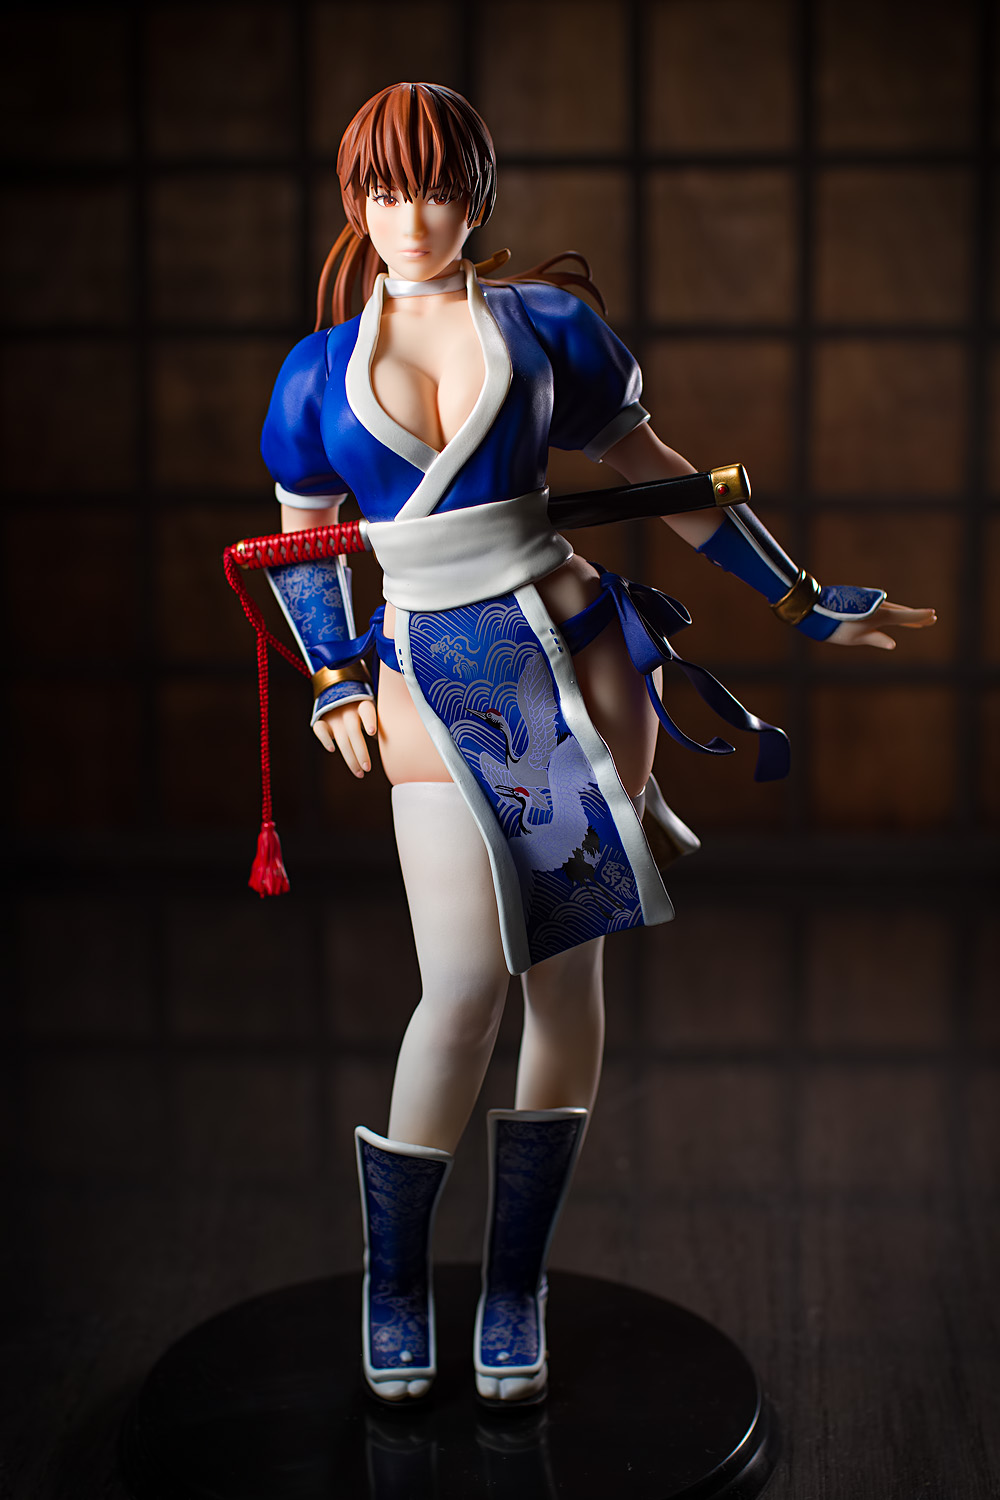 Kasumi from Dead or Alive 5 